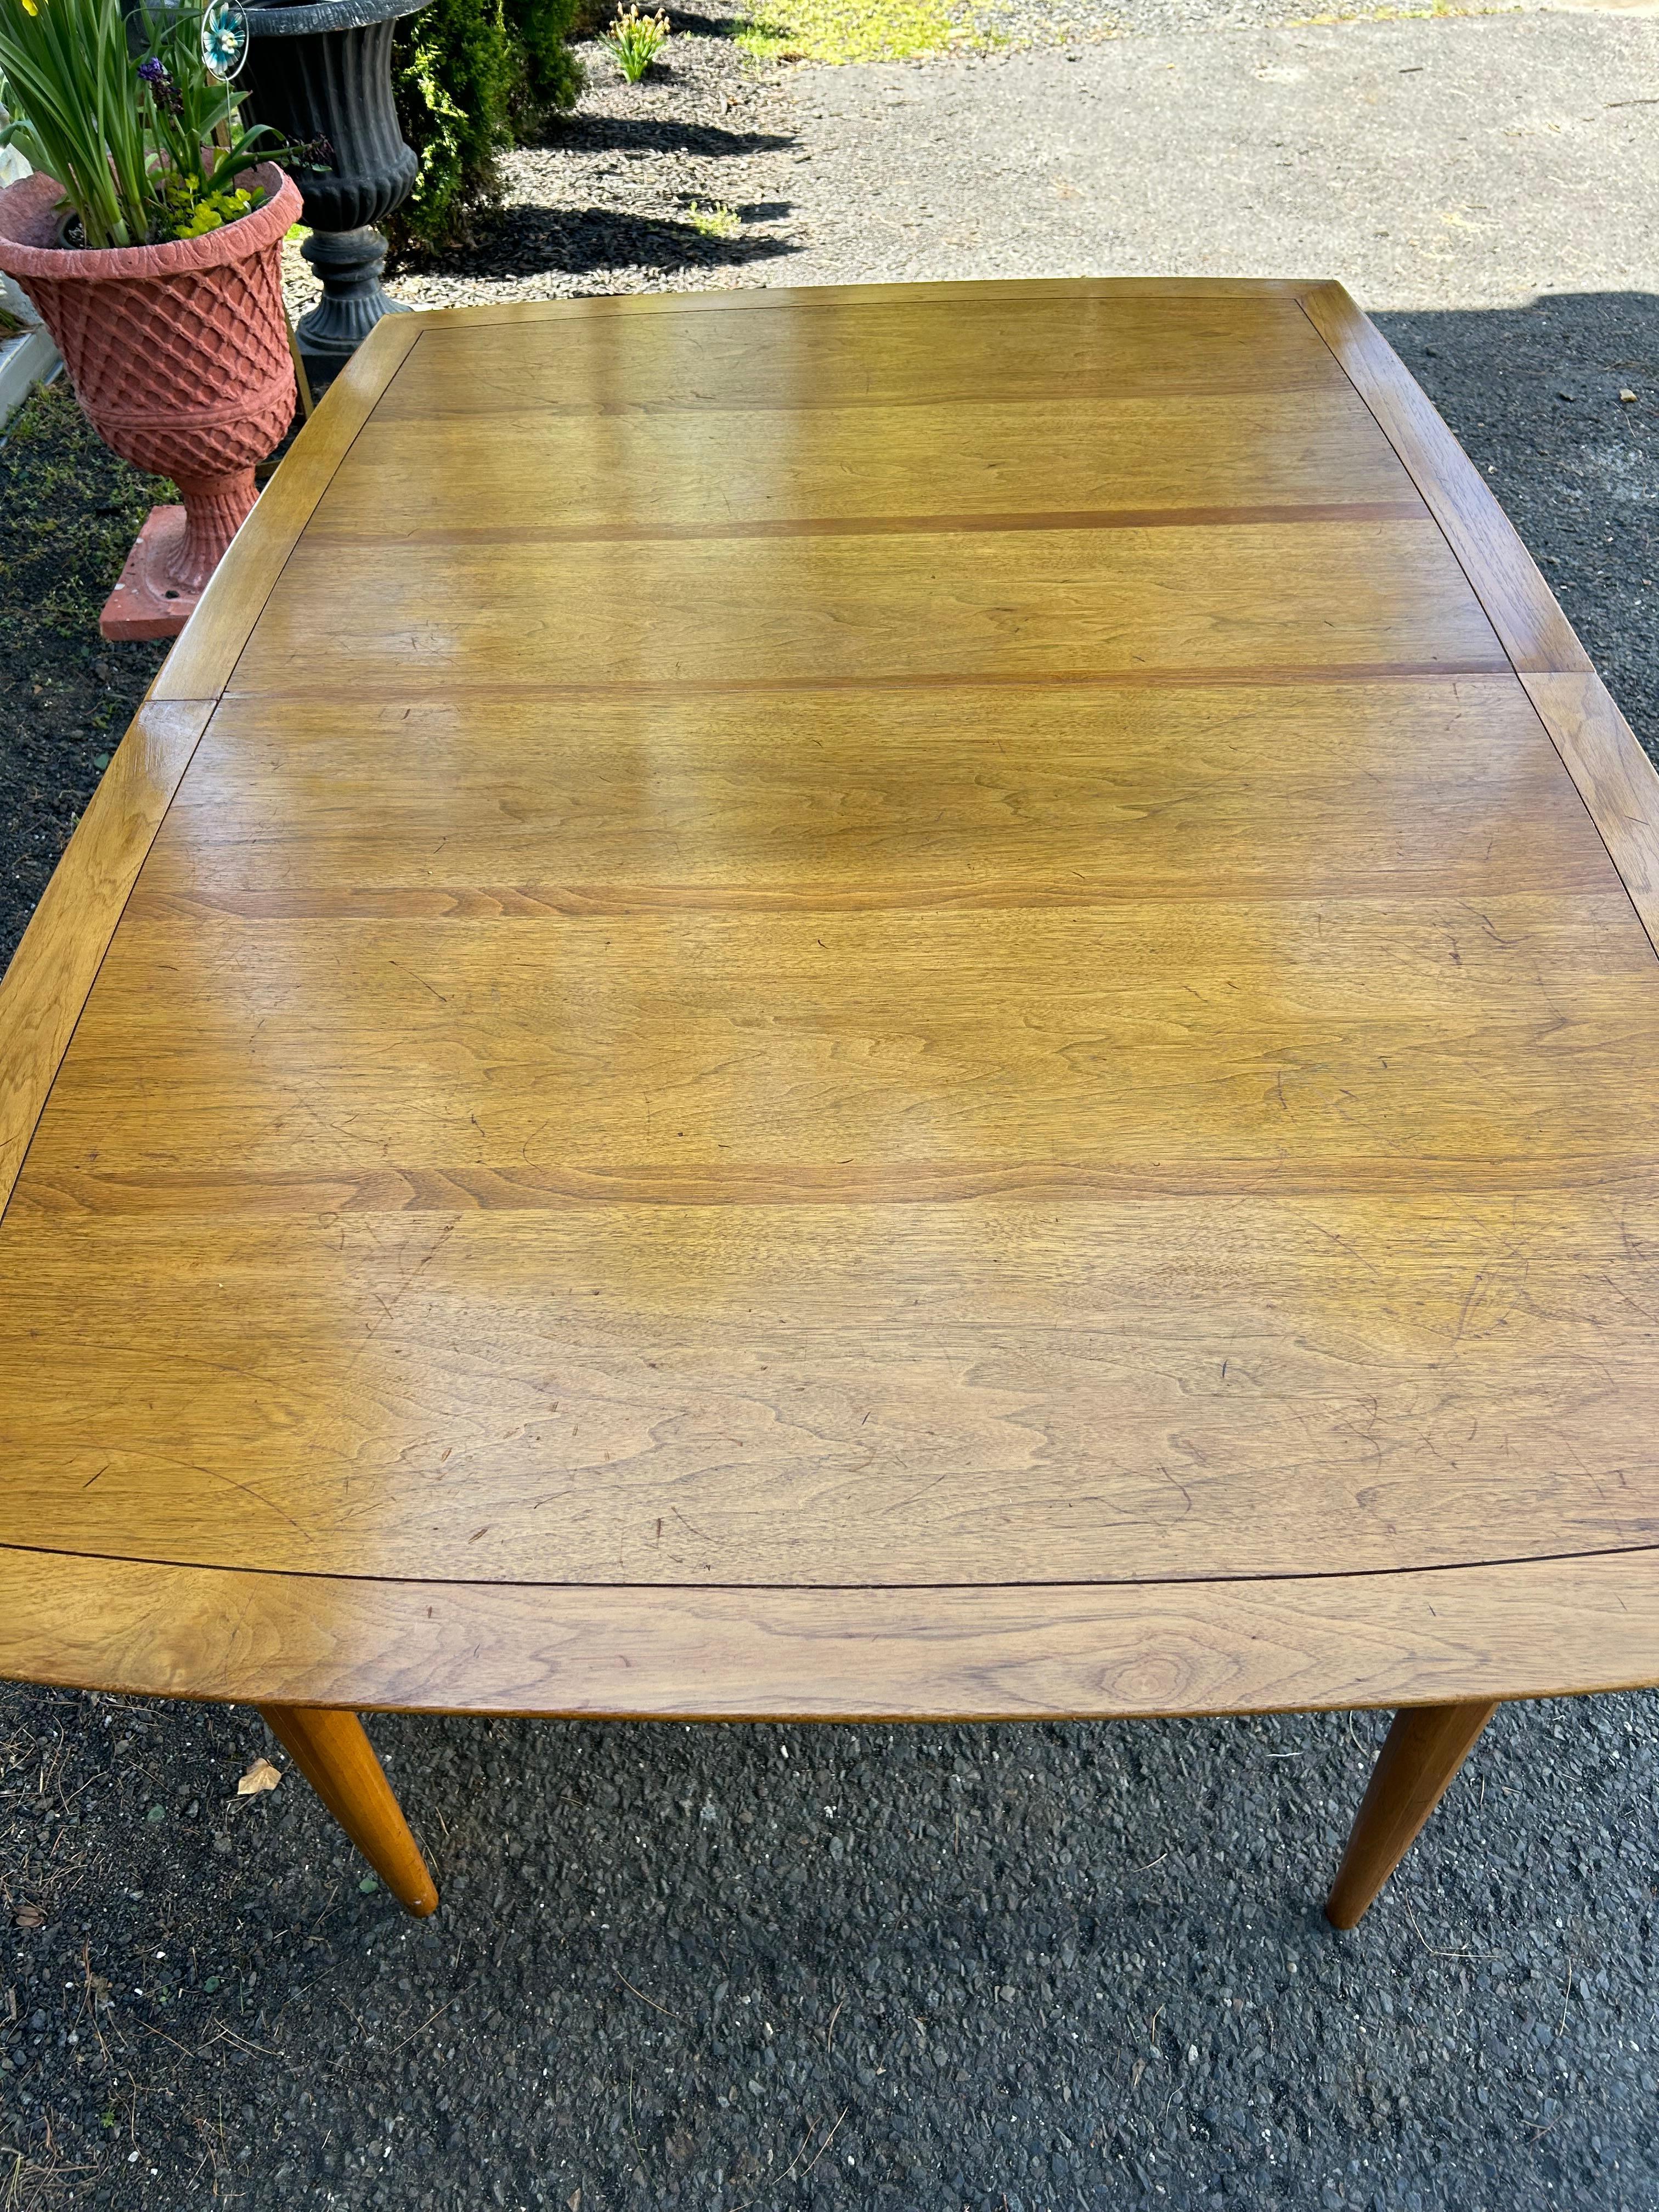 Gorgeous Tomlinson Sophisticate Dining Table Mid-Century Modern In Good Condition For Sale In Pemberton, NJ